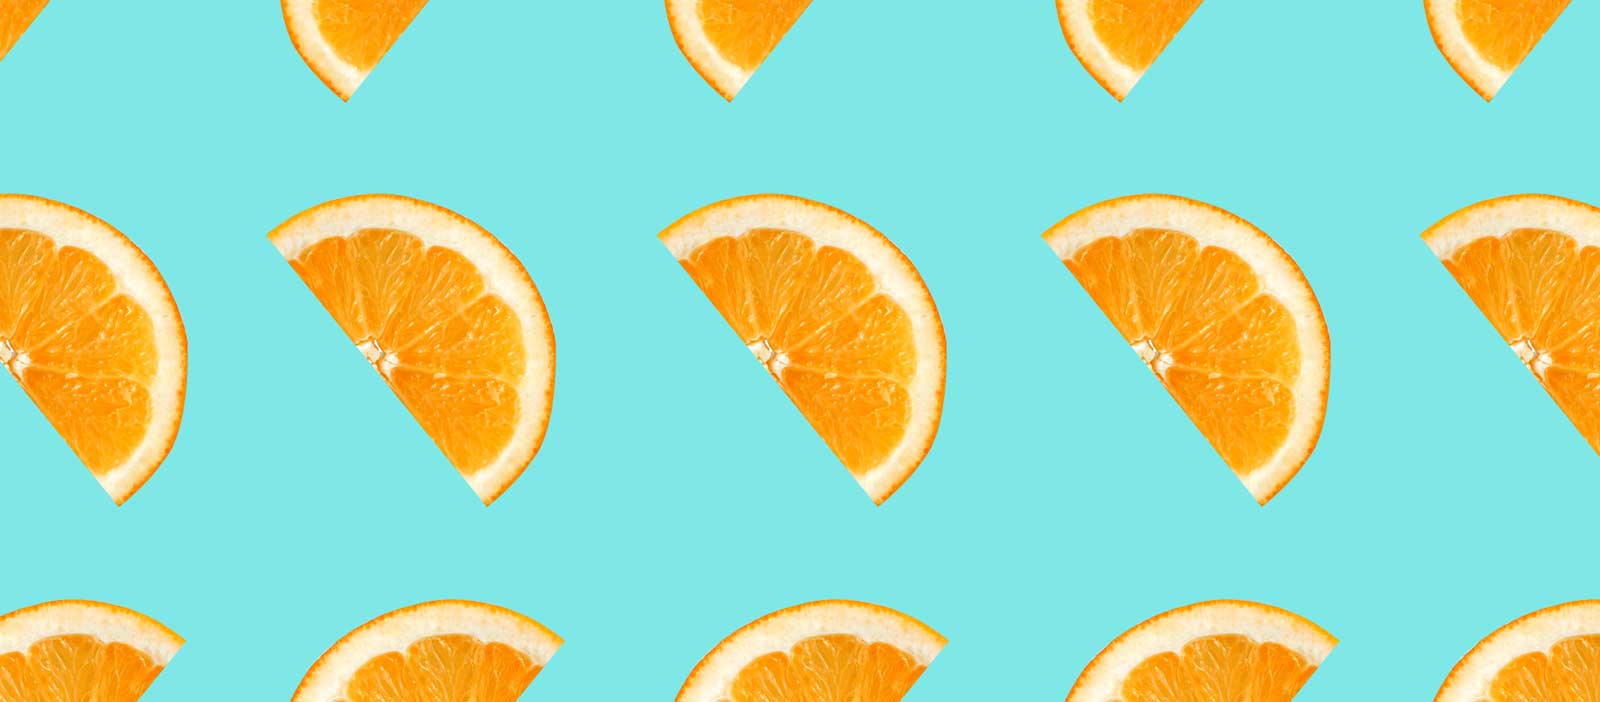 Our Response to Covid - Orange slice pattern on a light blue background